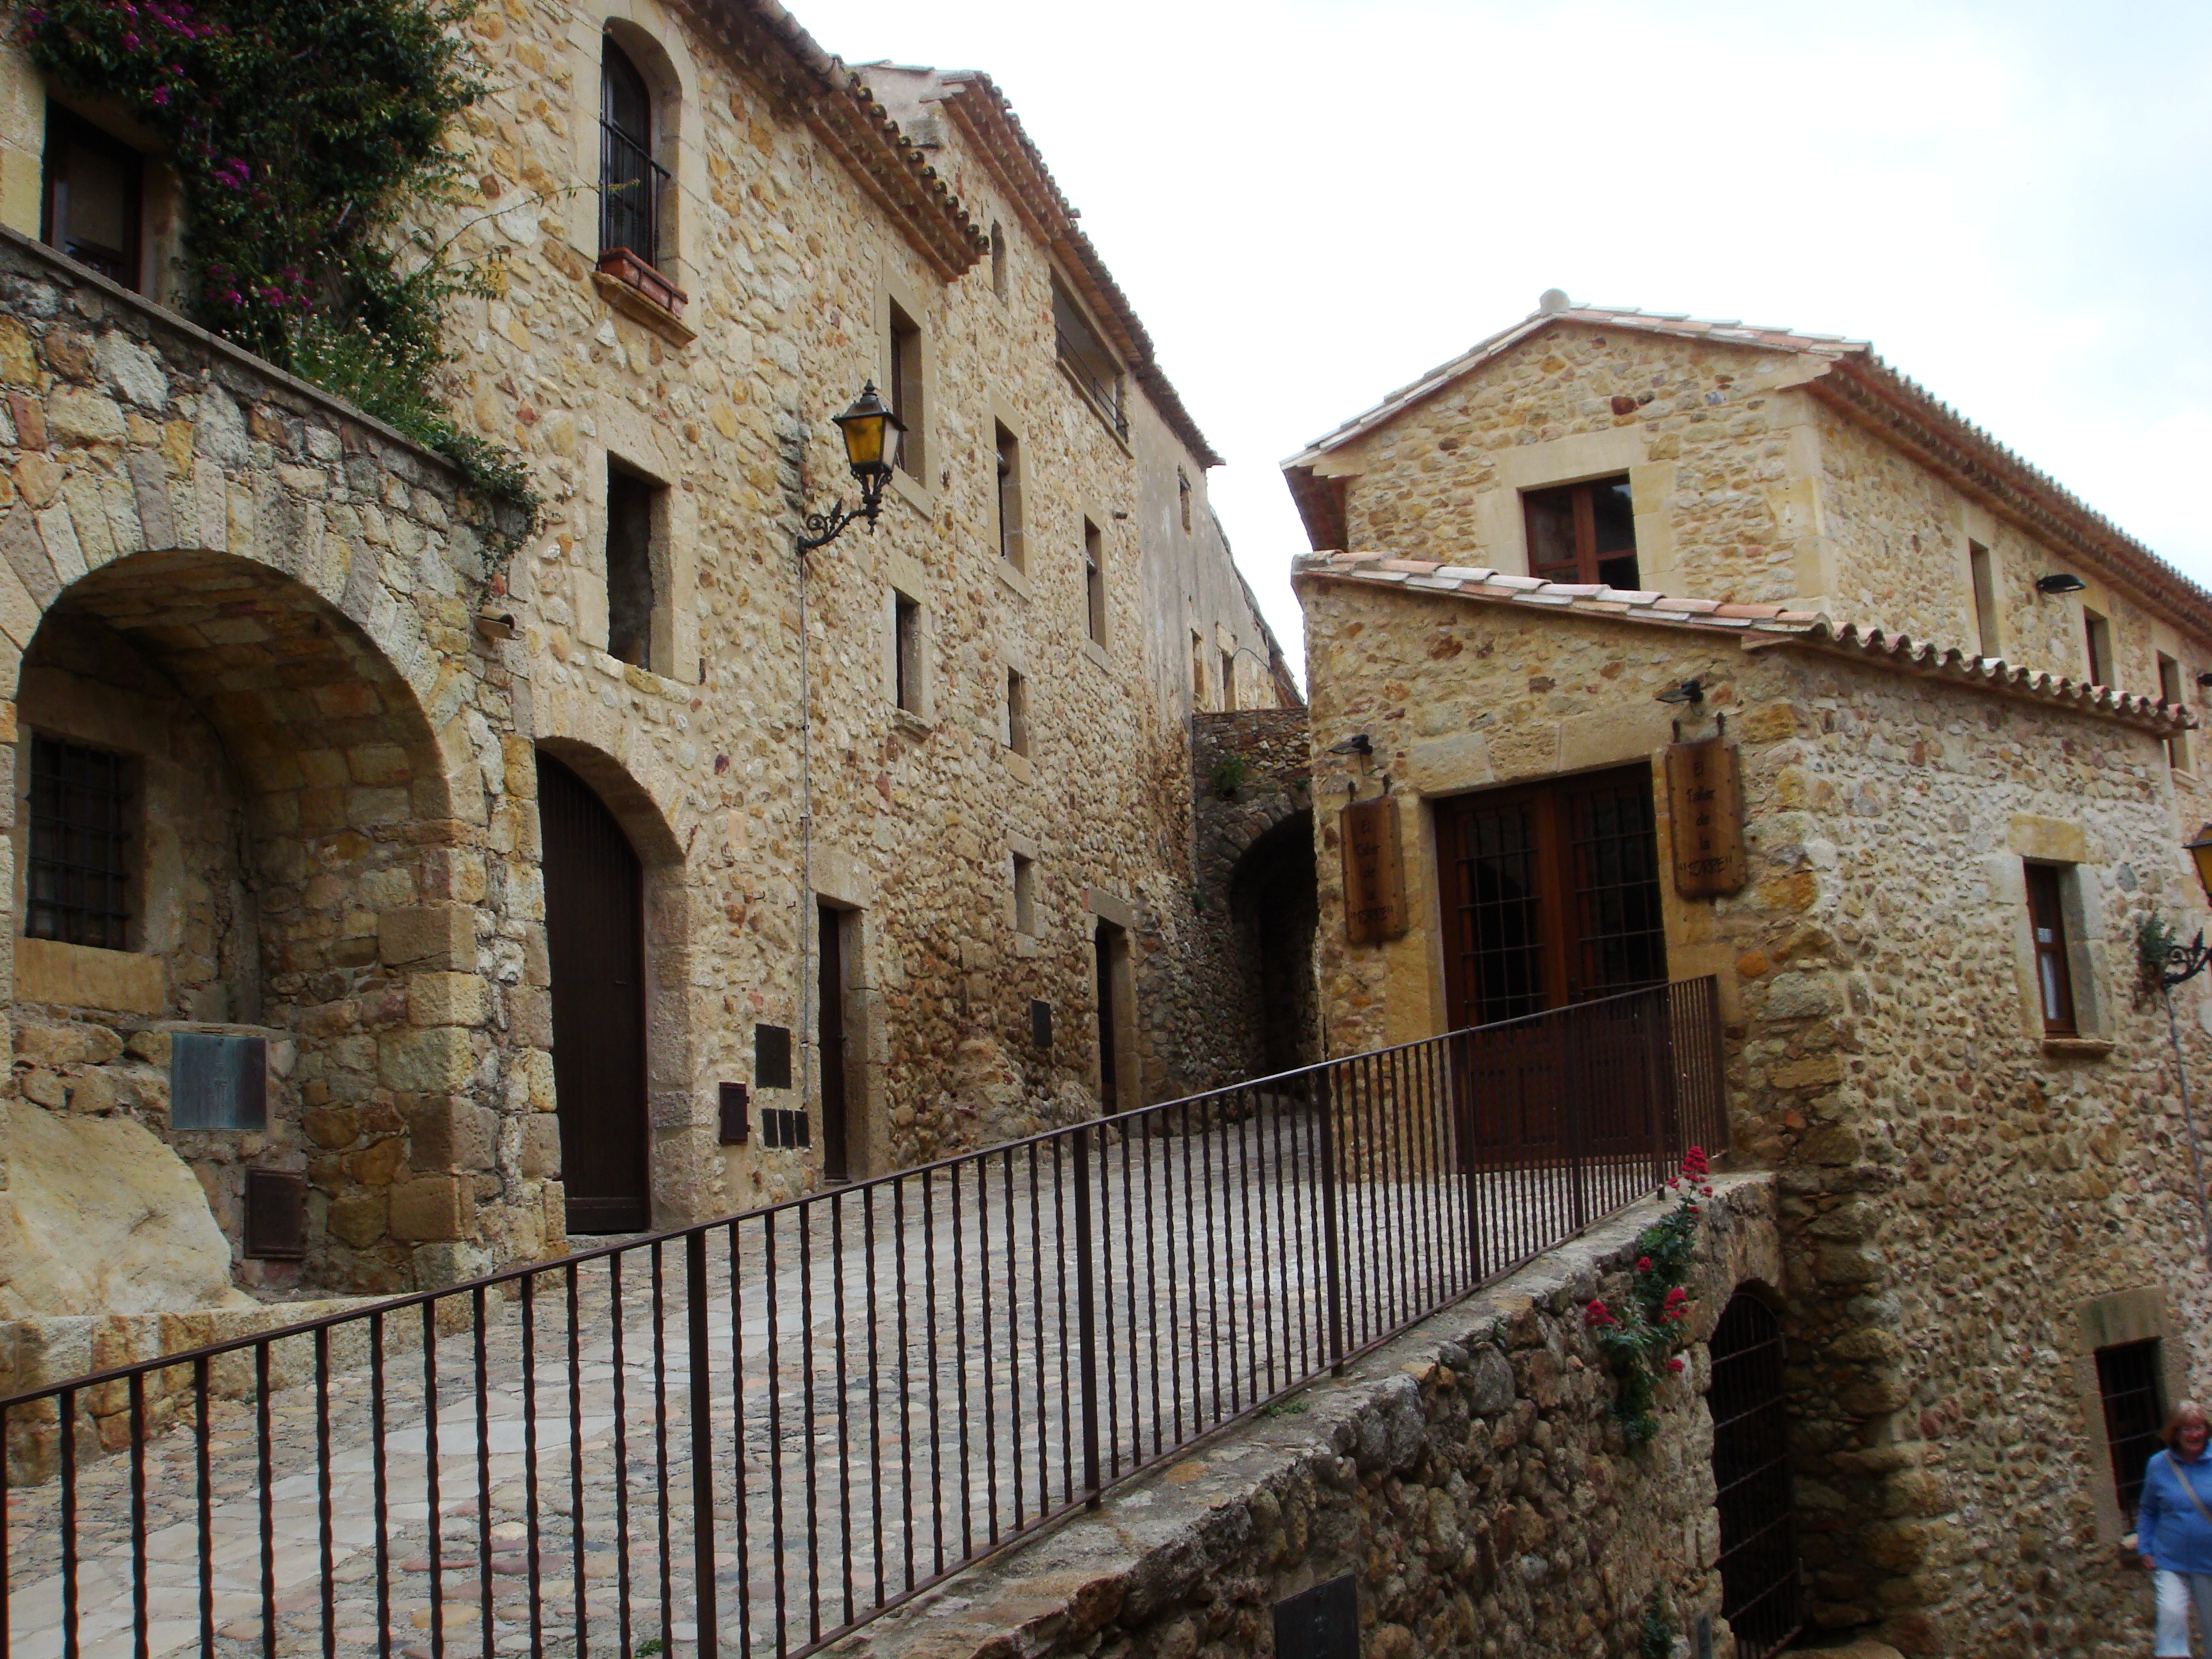 The medieval town of Peratallada, Spain